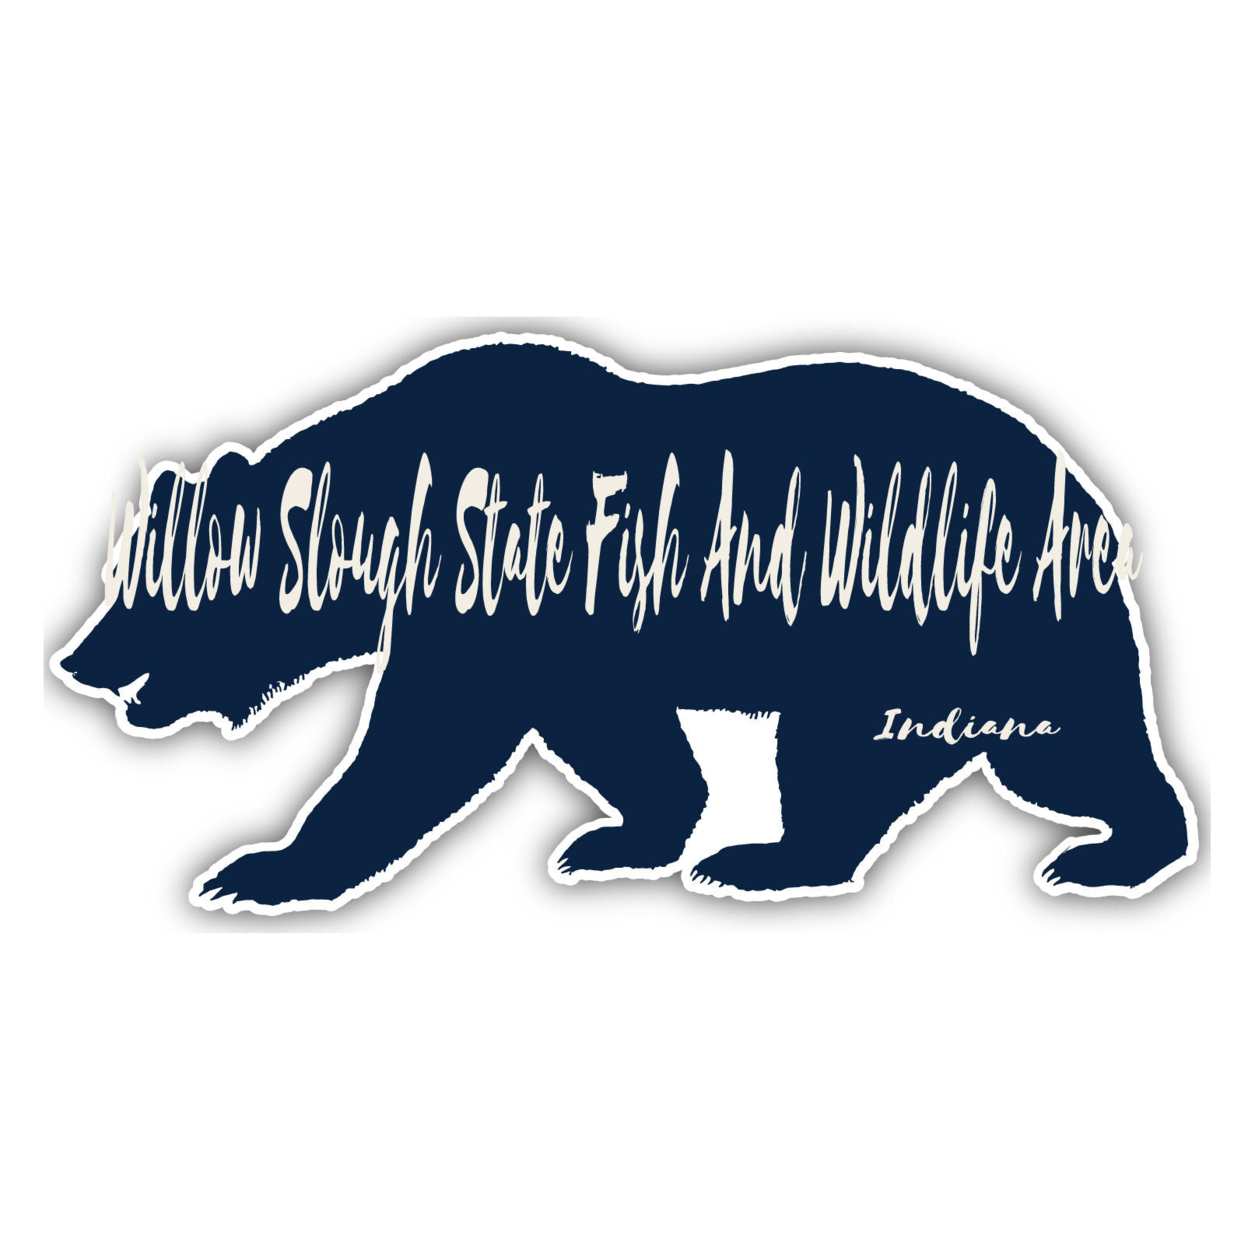 Willow Slough State Fish And Wildlife Area Indiana Souvenir Decorative Stickers (Choose Theme And Size) - Single Unit, 2-Inch, Bear